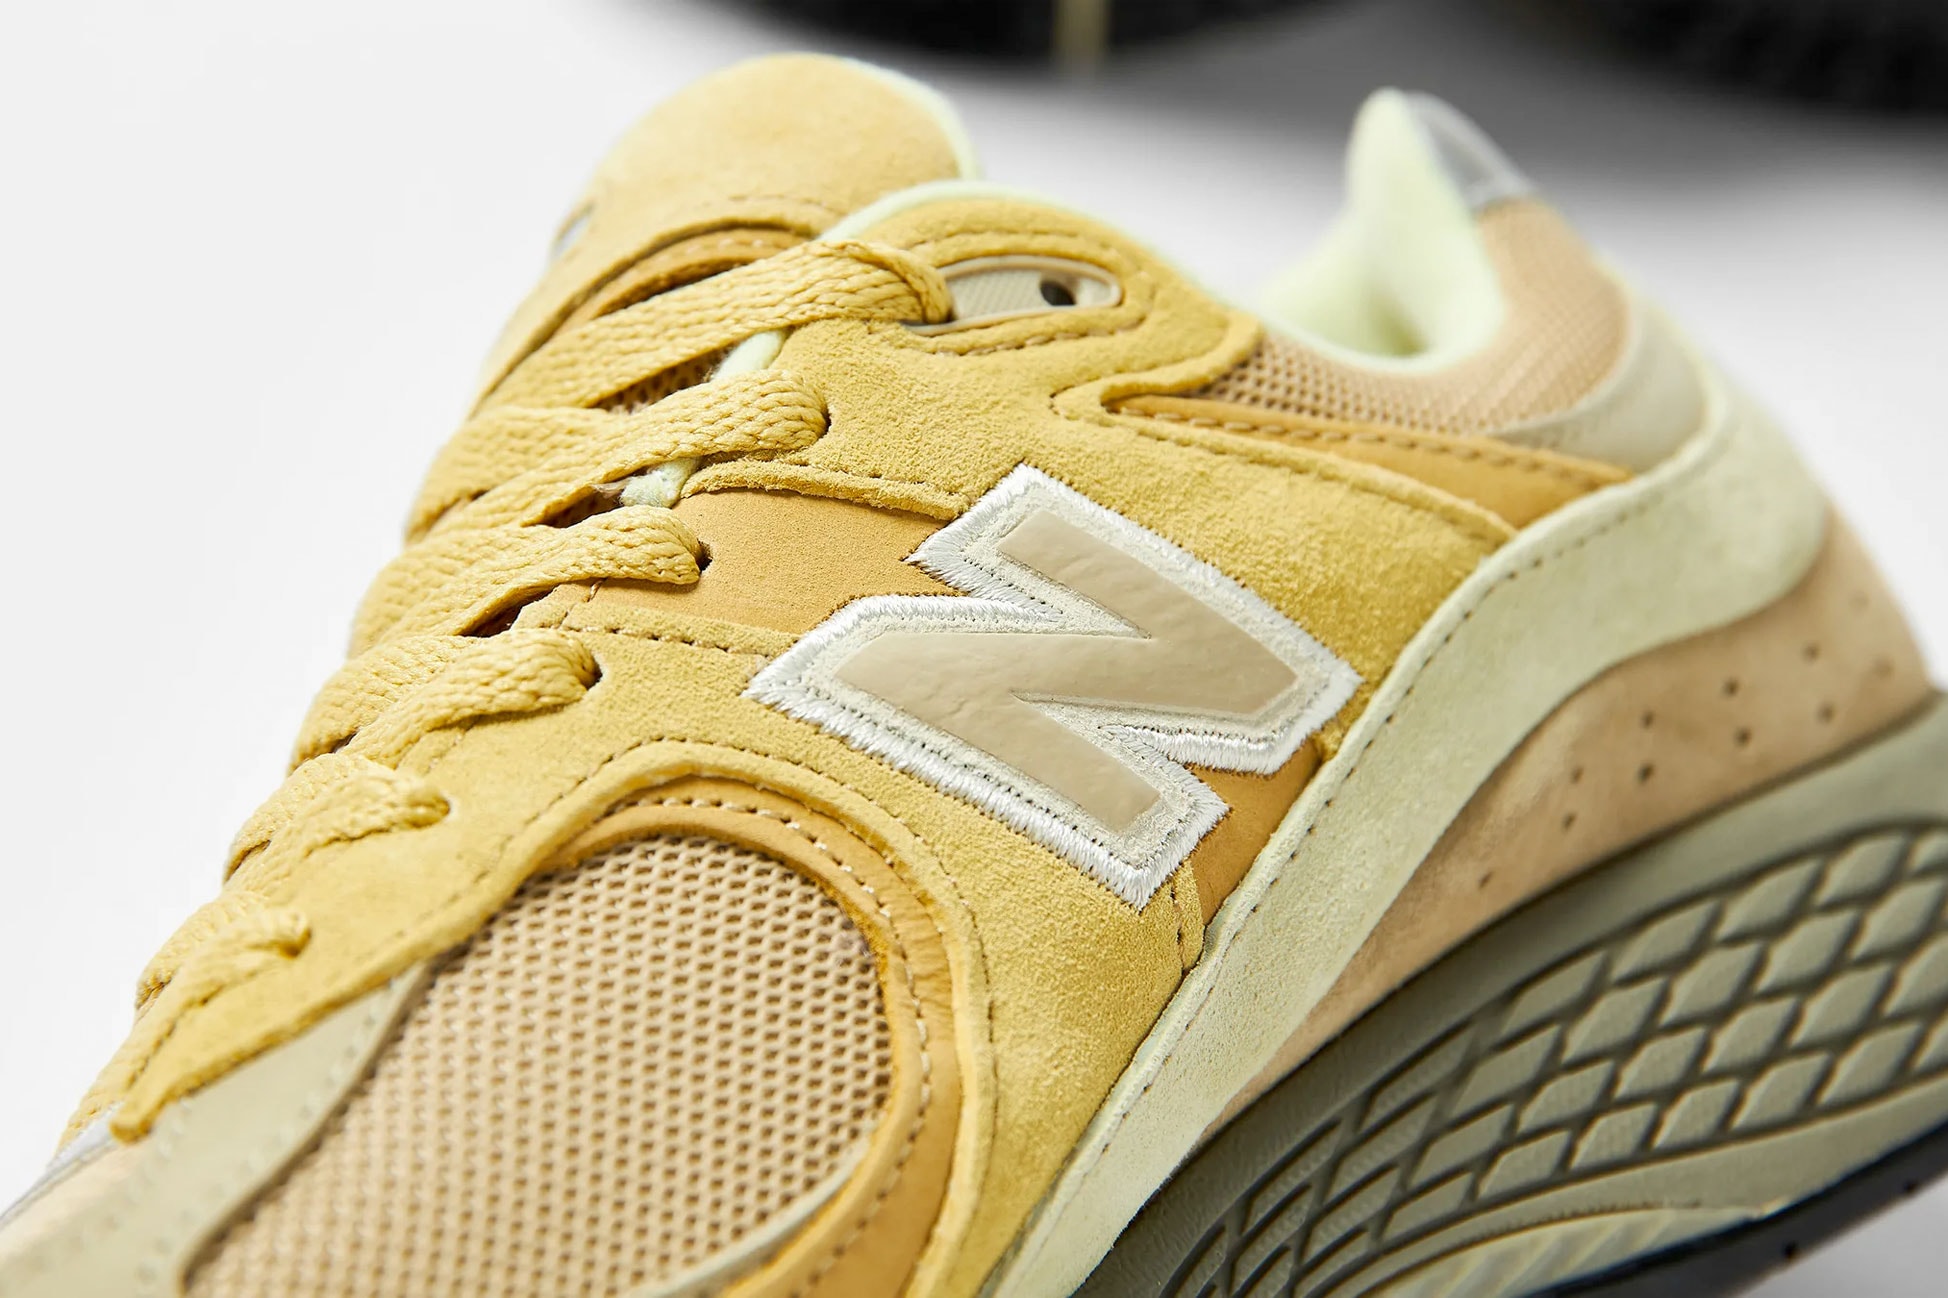 auralee tokyo new balance 2002r insole branding suede vintage muted green yellow sail white release info date price september 9